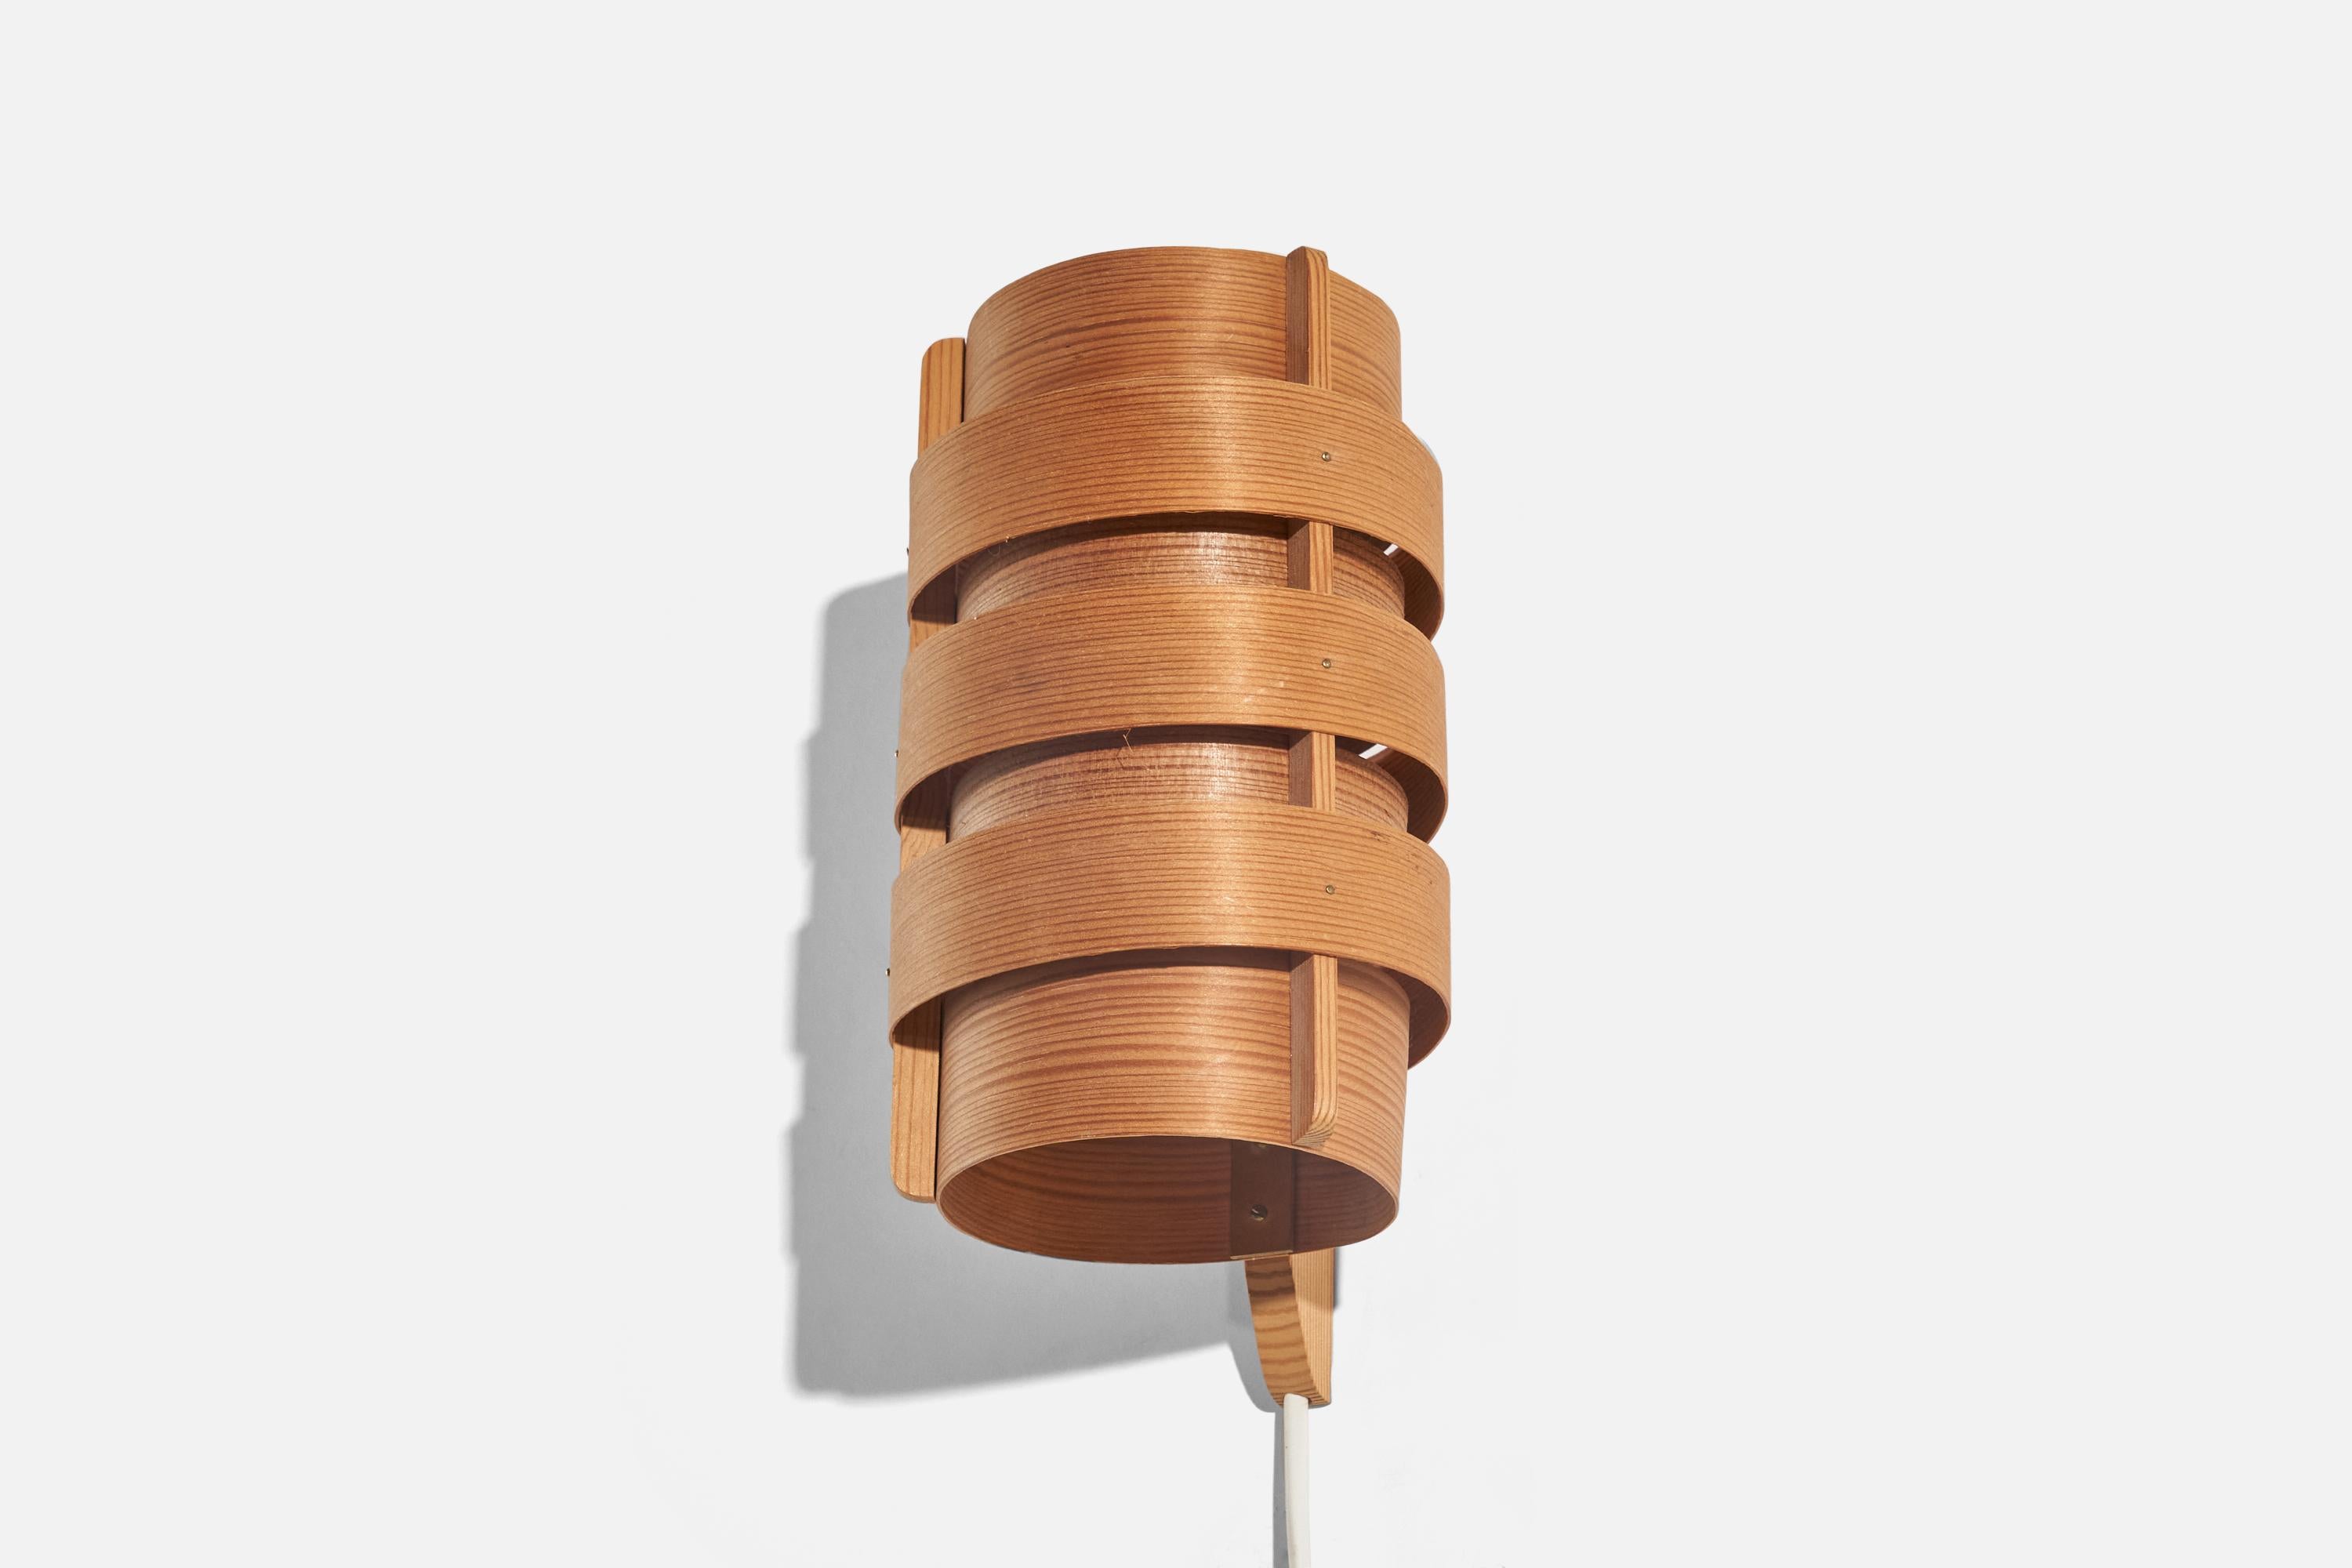 A pine and moulded pine veneer sconce / wall light designed and produced by Hans-Agne Jakobsson, Sweden. c. 1970s.

Dimensions of Back Plate (inches) : 10.18 x 0.46 x 0.81 (Height x Width x Depth).

Socket takes E-14 bulb.

There is no maximum